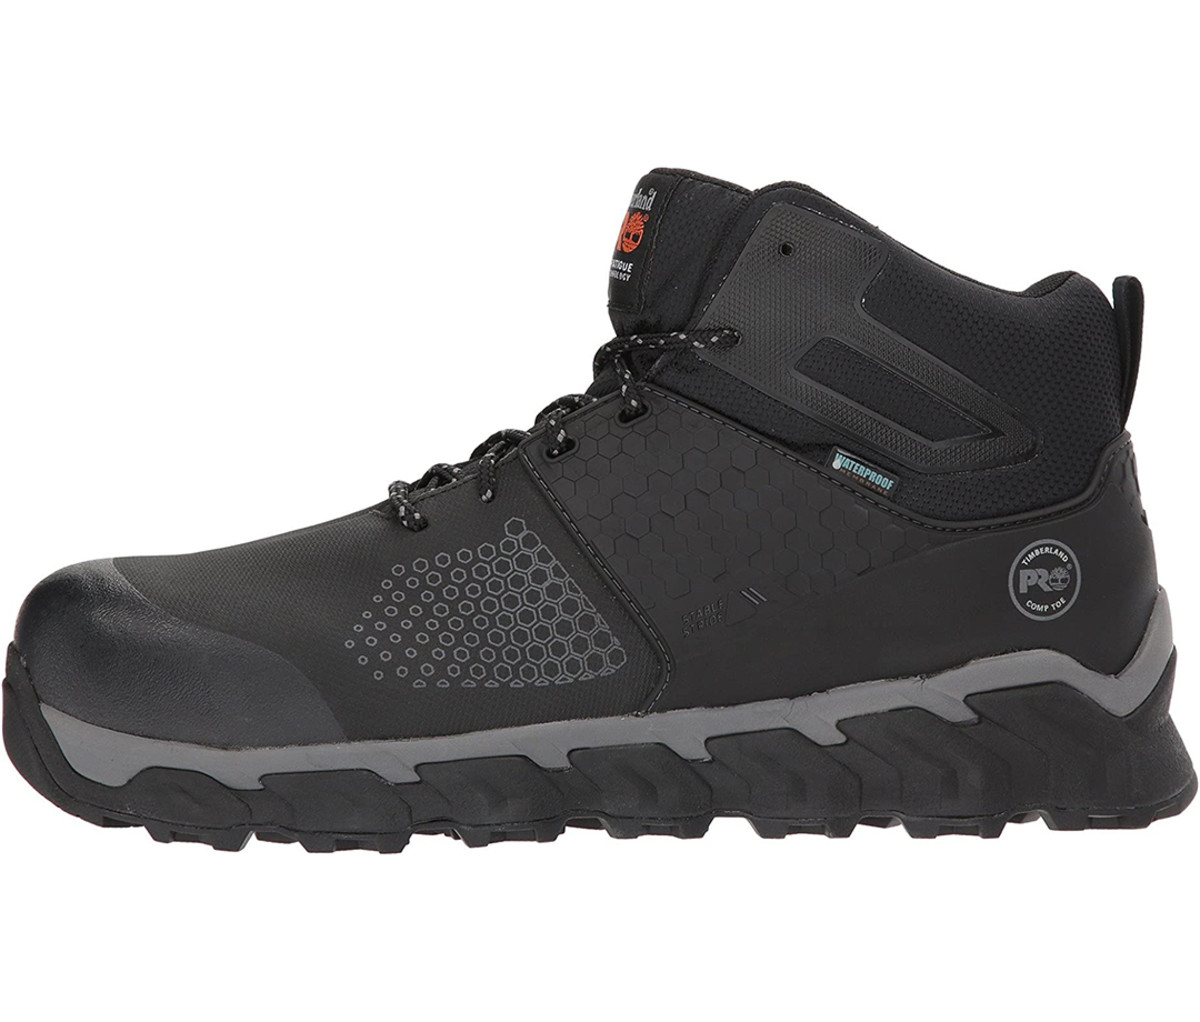 Work in Comfort With These Timberland PRO Ridgework Boots - Men's Journal